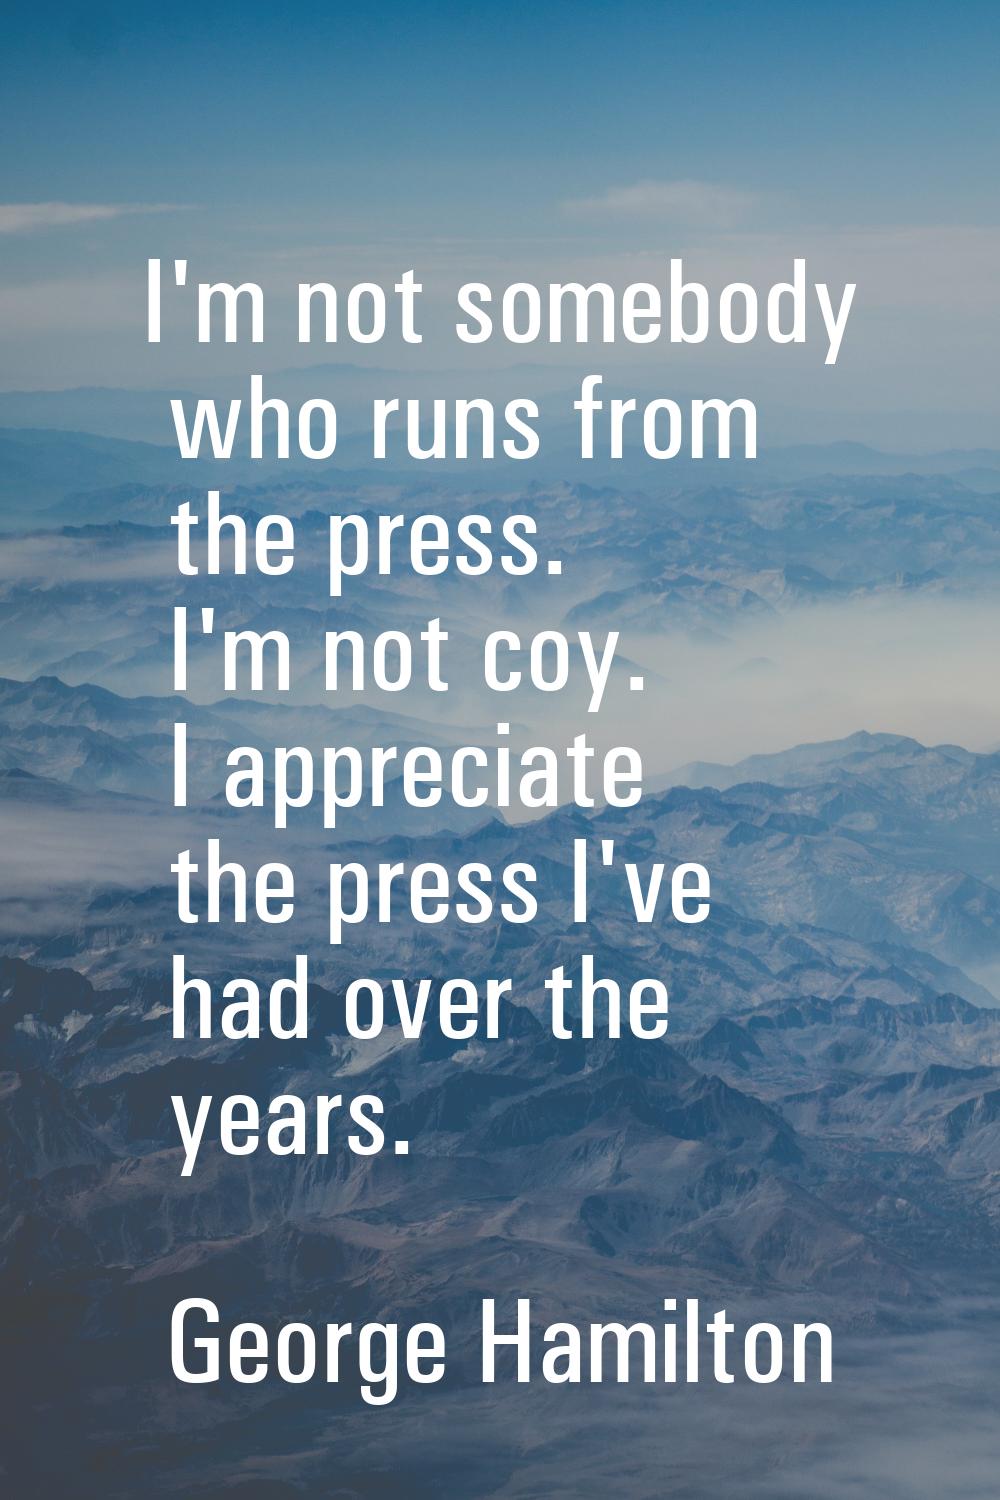 I'm not somebody who runs from the press. I'm not coy. I appreciate the press I've had over the yea